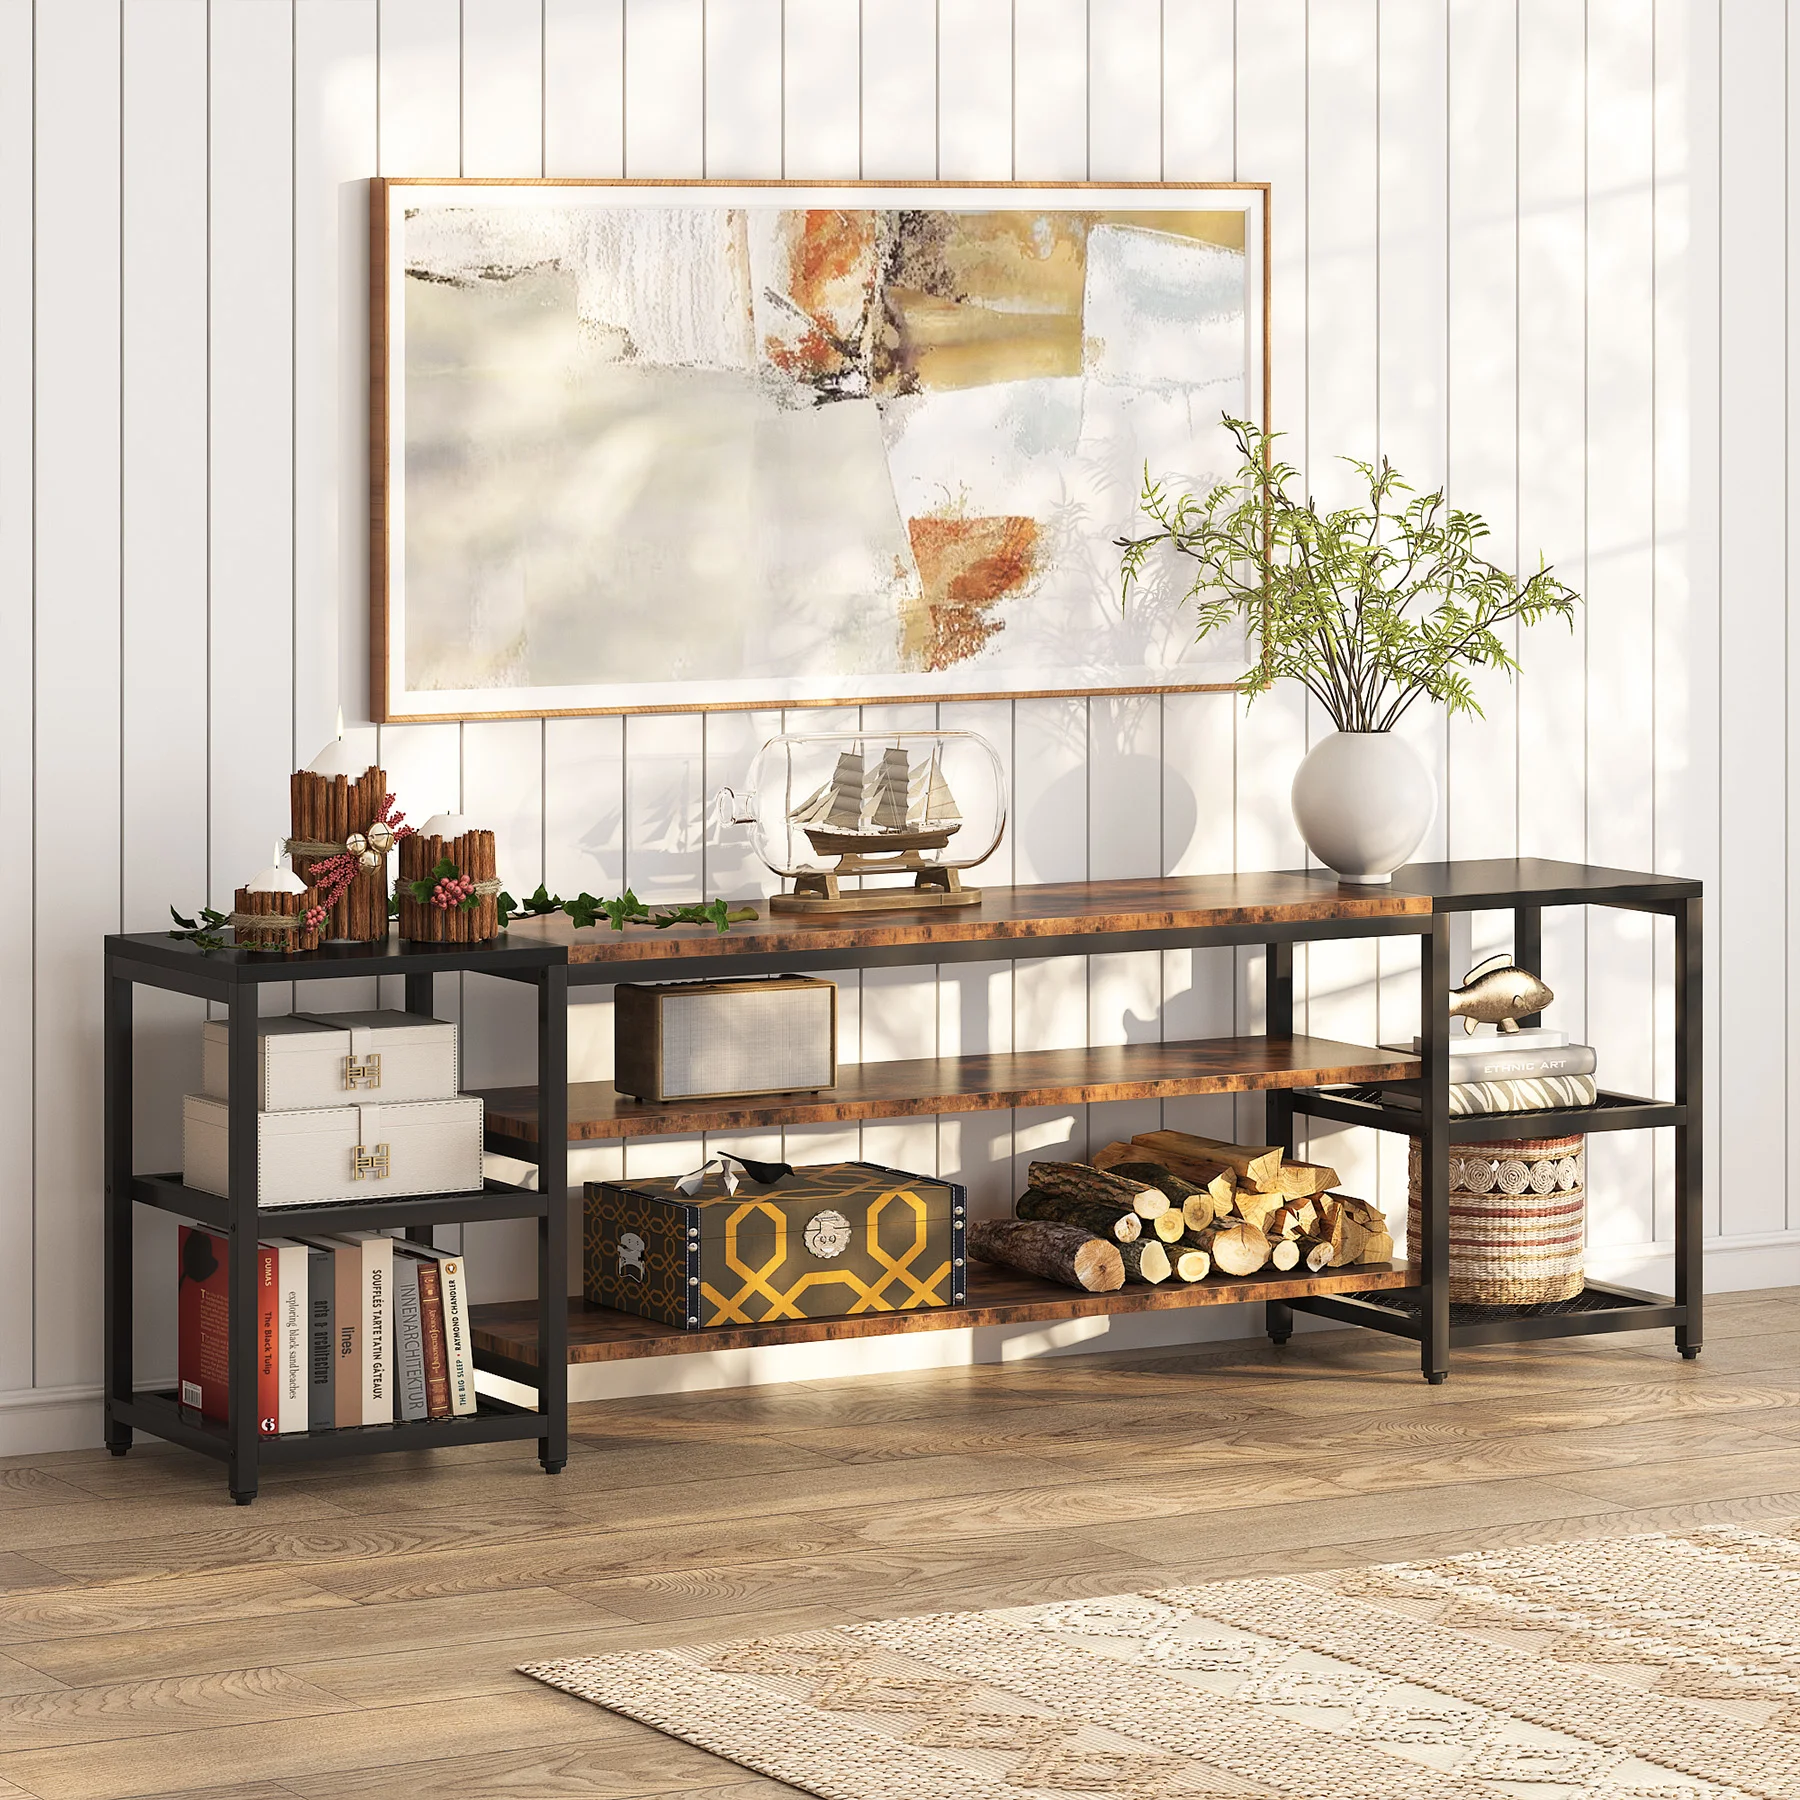 Tribesigns 2023 Antique Style TV Stand with 3 Tier Storage Shelves Accommodate TVs up to 85'' for Living Room